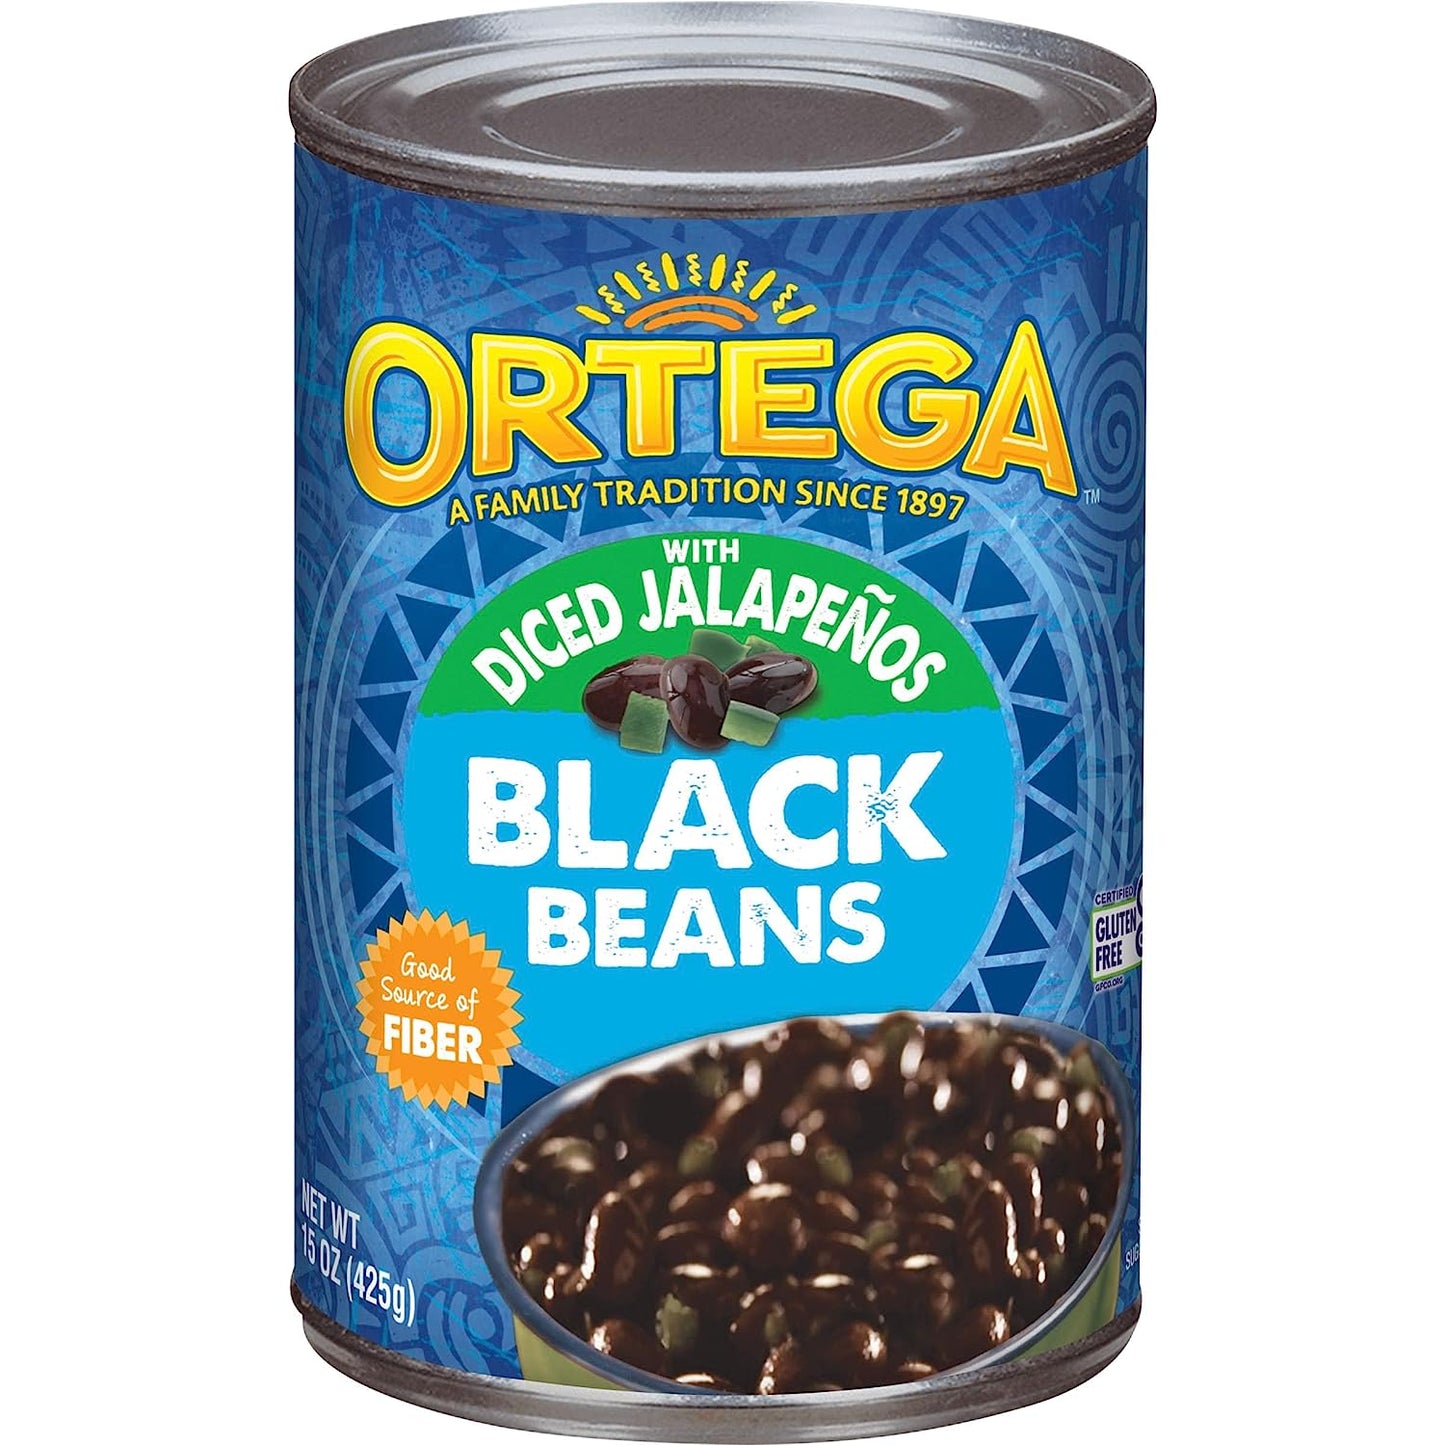 Ortega Black Beans, With Diced Jalapenos, 15 Ounce (Pack of 12)